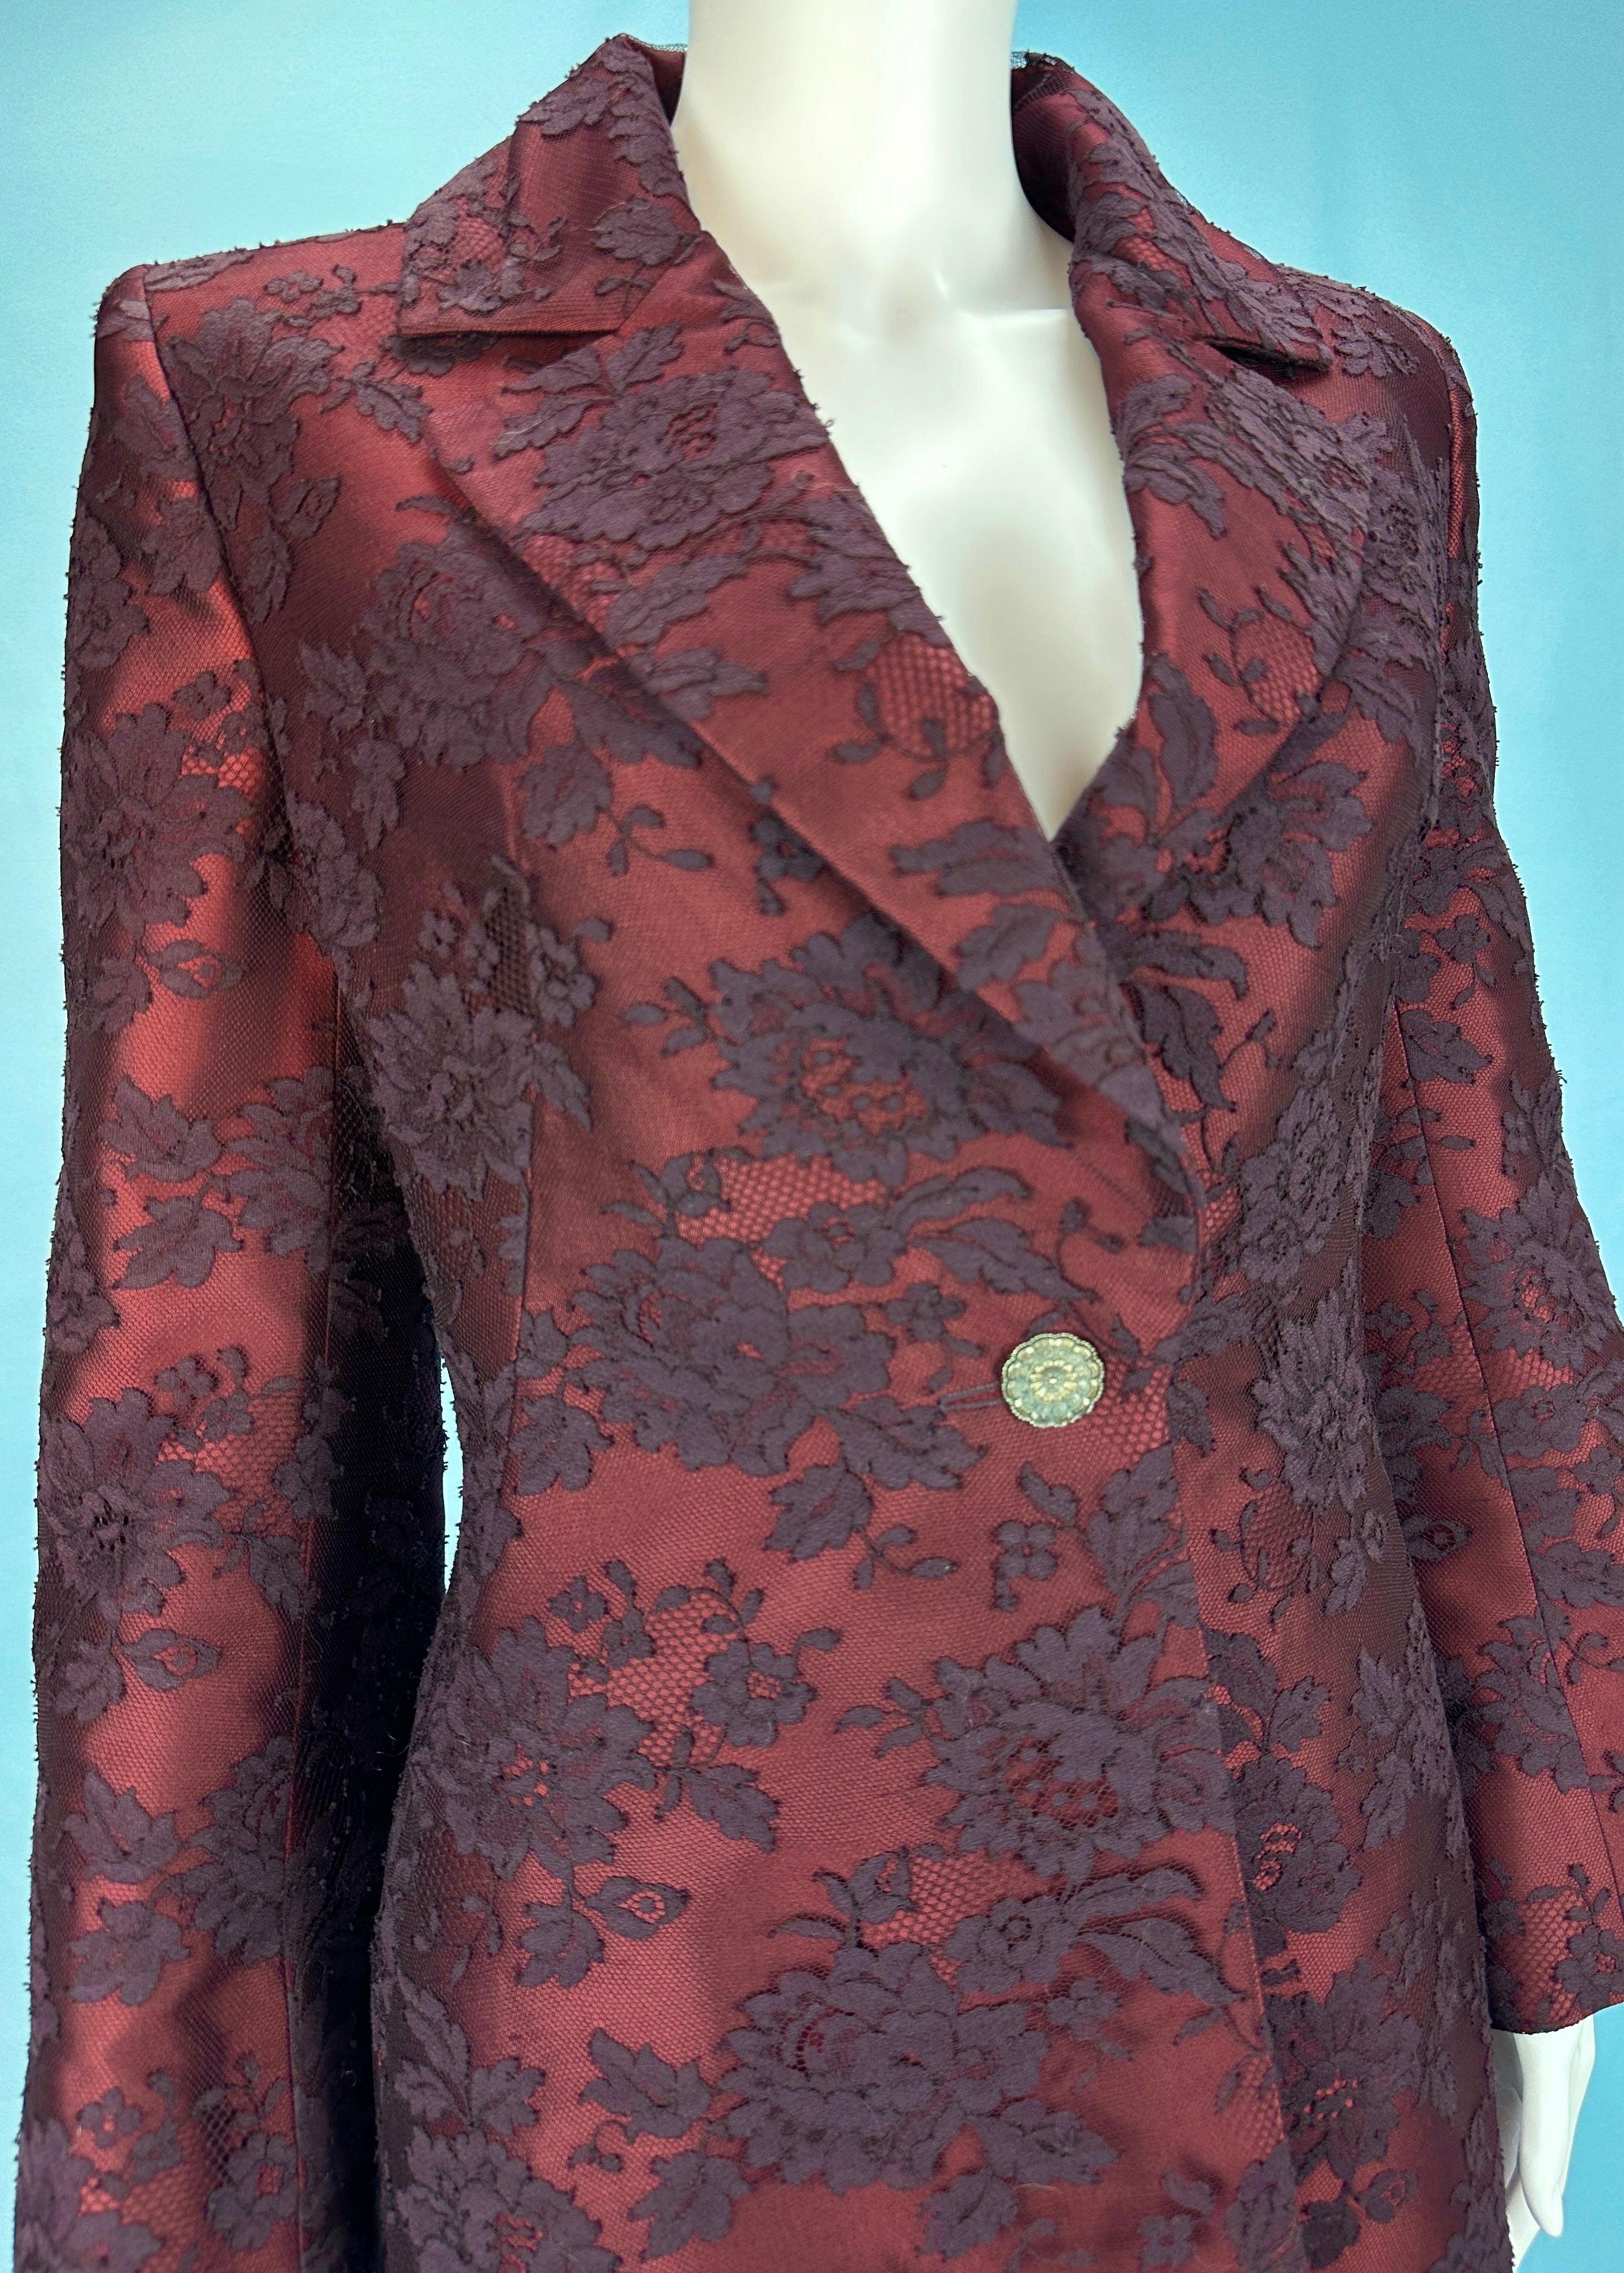 Givenchy Couture by Alexander McQueen Fall 1998 Red Silk Lace Jacket In Good Condition For Sale In Hertfordshire, GB